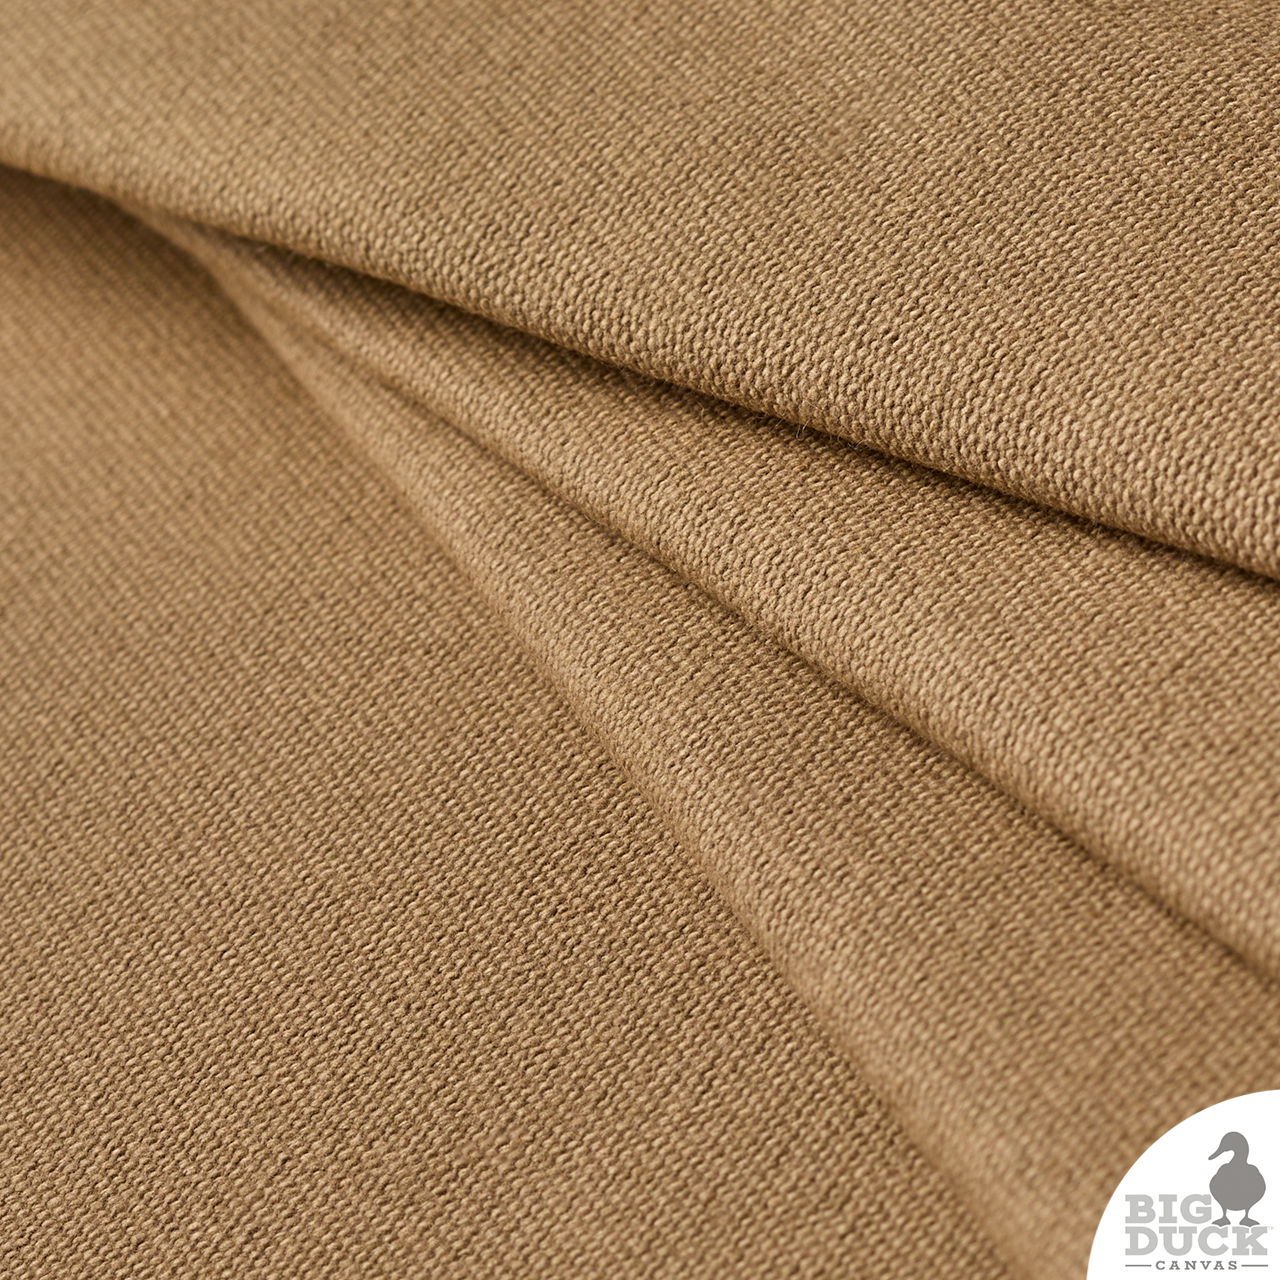 Heavy Duty Waxed Cotton Canvas Fabric / Moss / Sold By The Yard